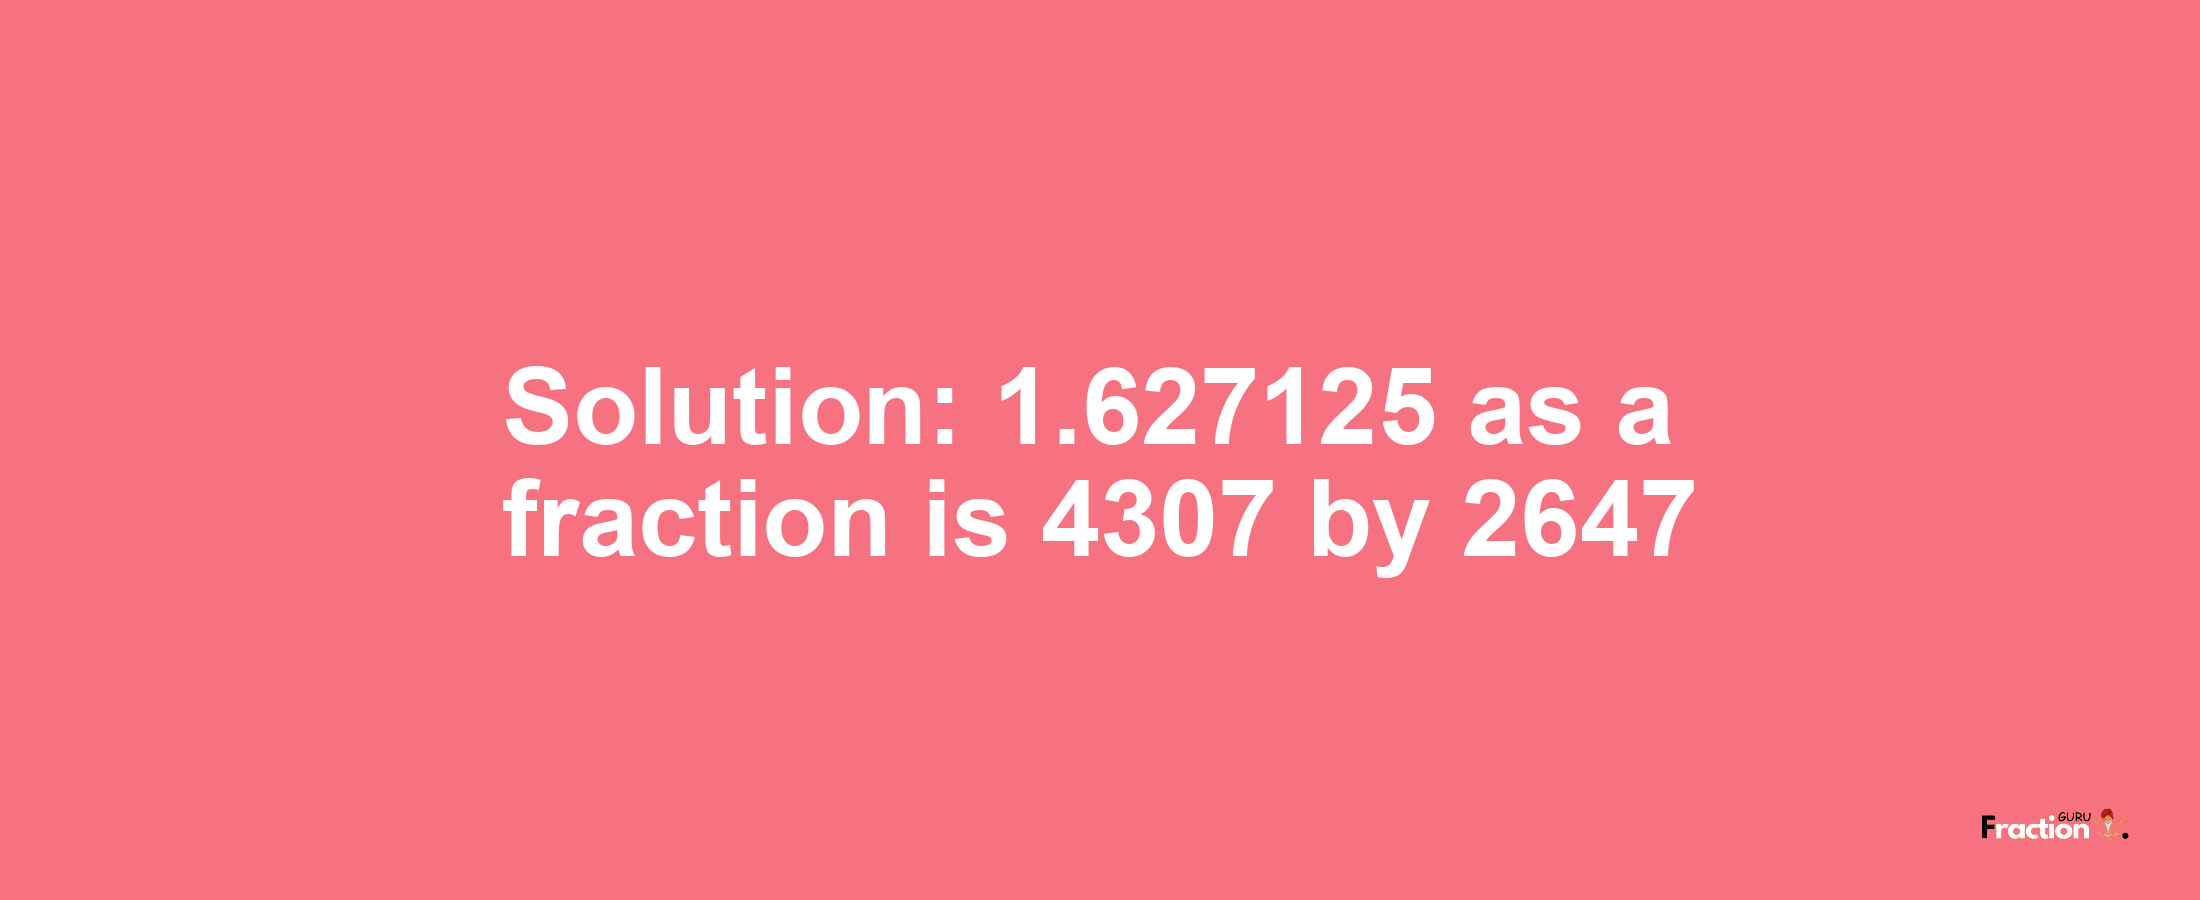 Solution:1.627125 as a fraction is 4307/2647